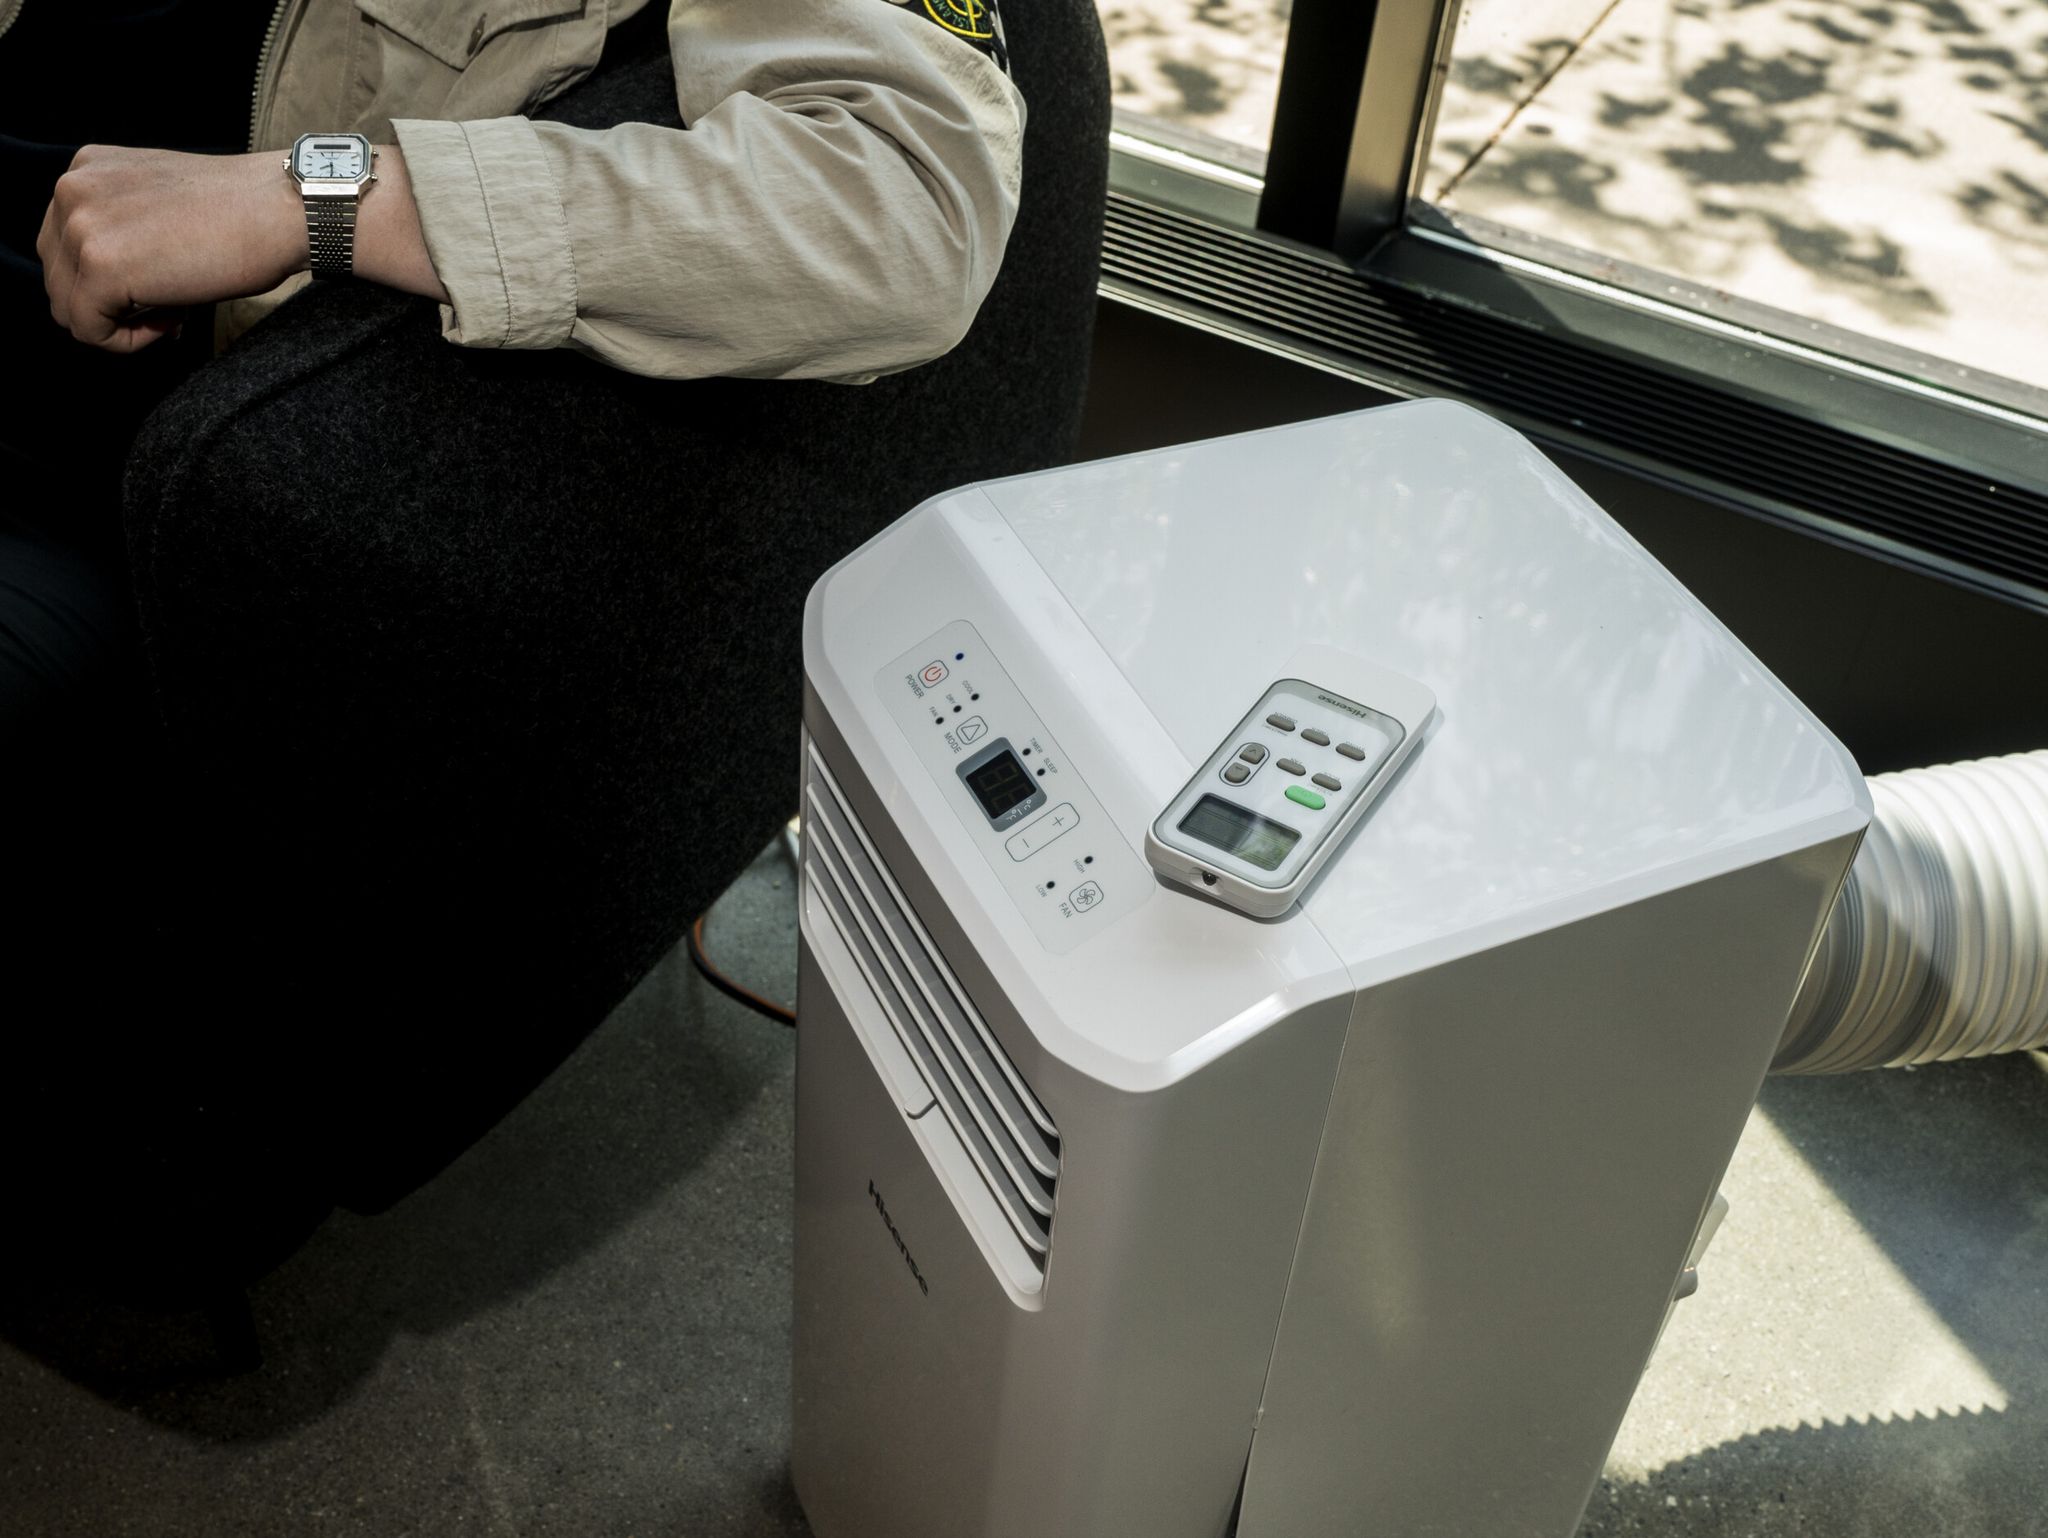 The Best Portable Air Conditioner - The New York Times